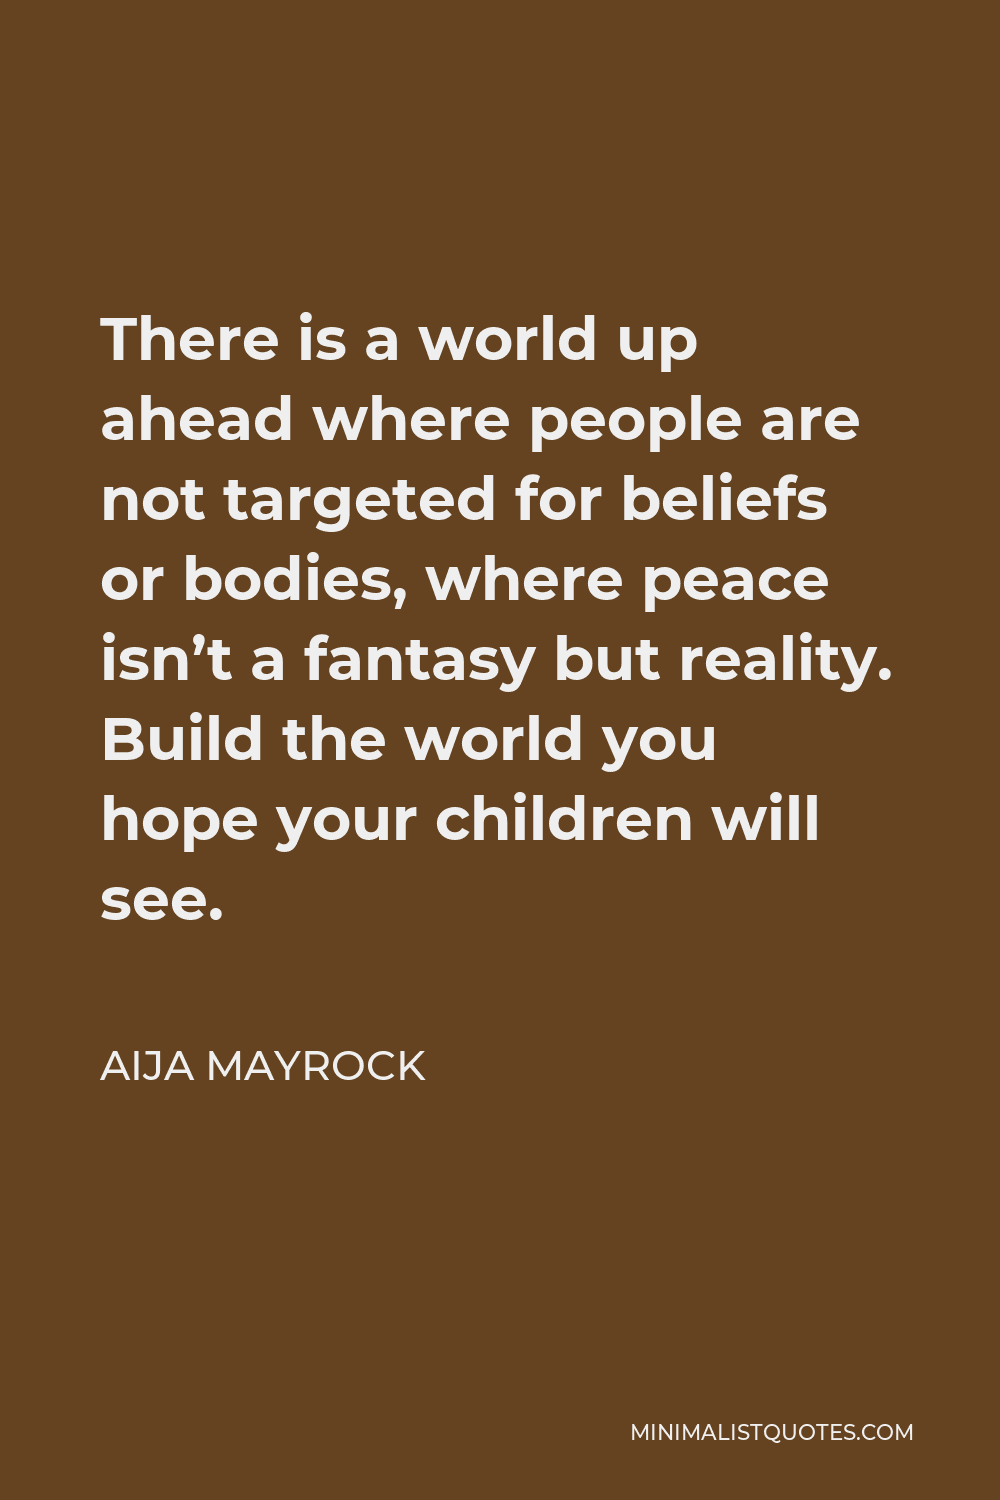 Aija Mayrock Quote - There is a world up ahead where people are not targeted for beliefs or bodies, where peace isn’t a fantasy but reality. Build the world you hope your children will see.